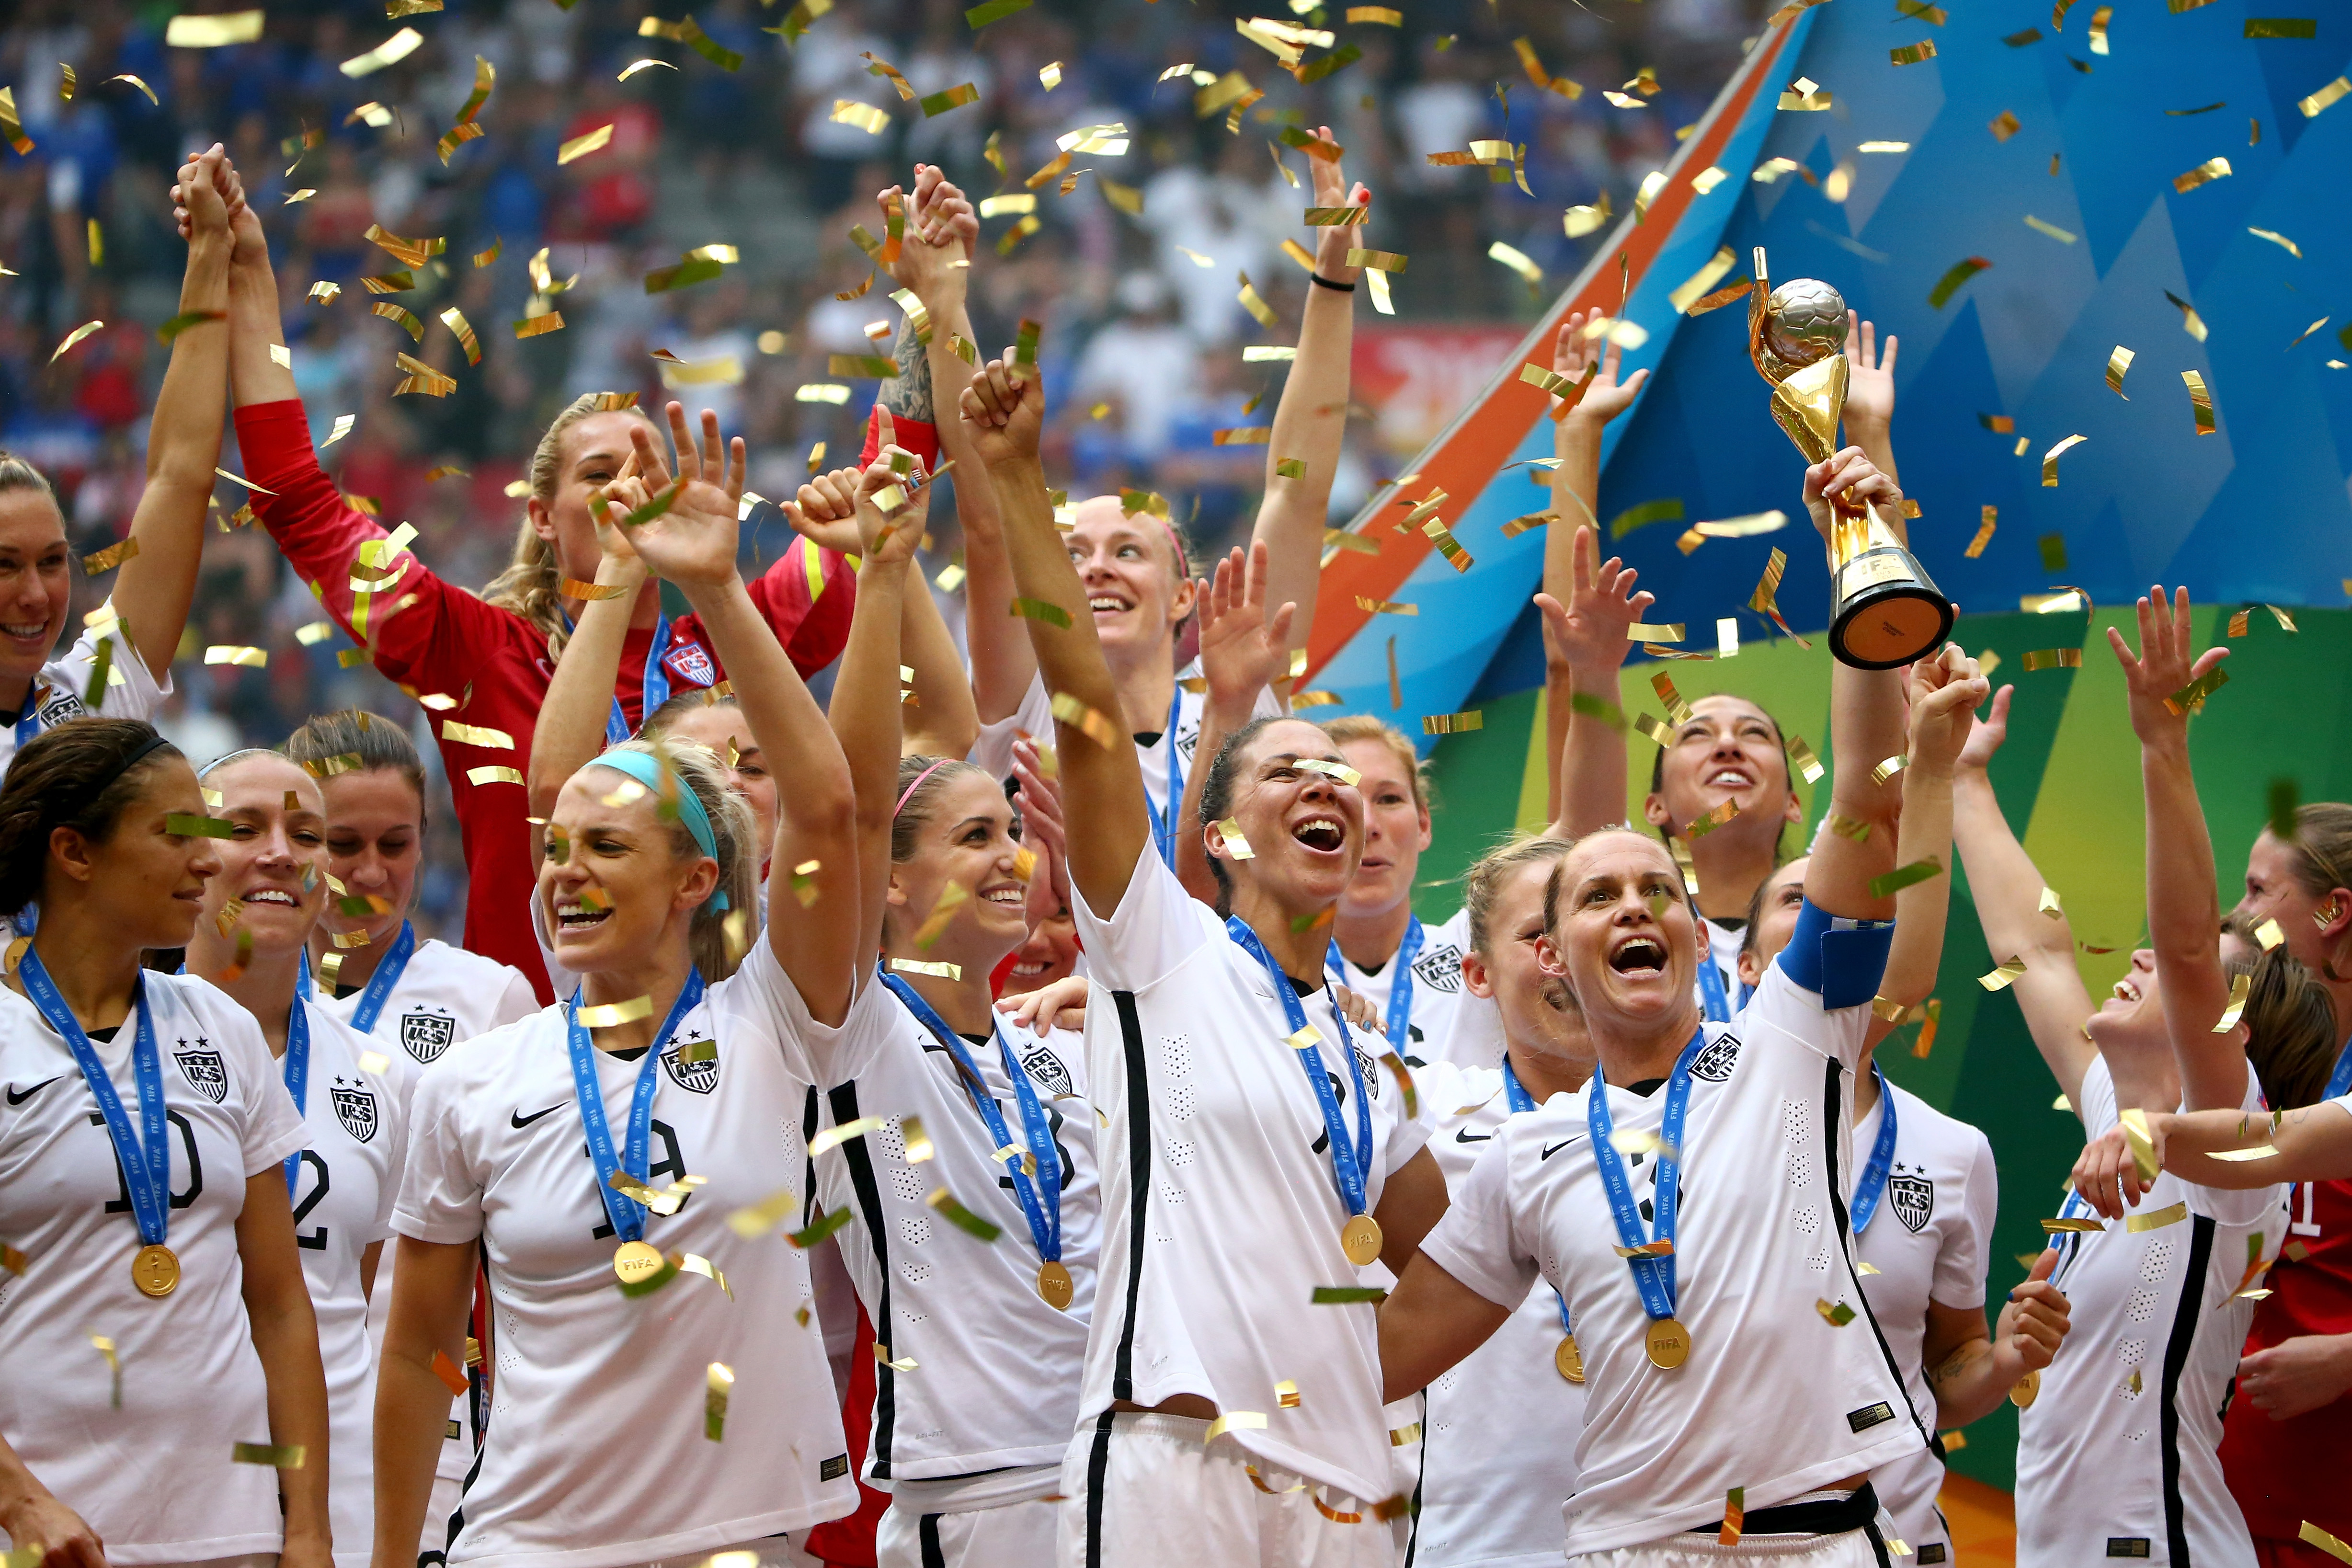 Women's World Cup USA celebrations continue after recordbreaking win